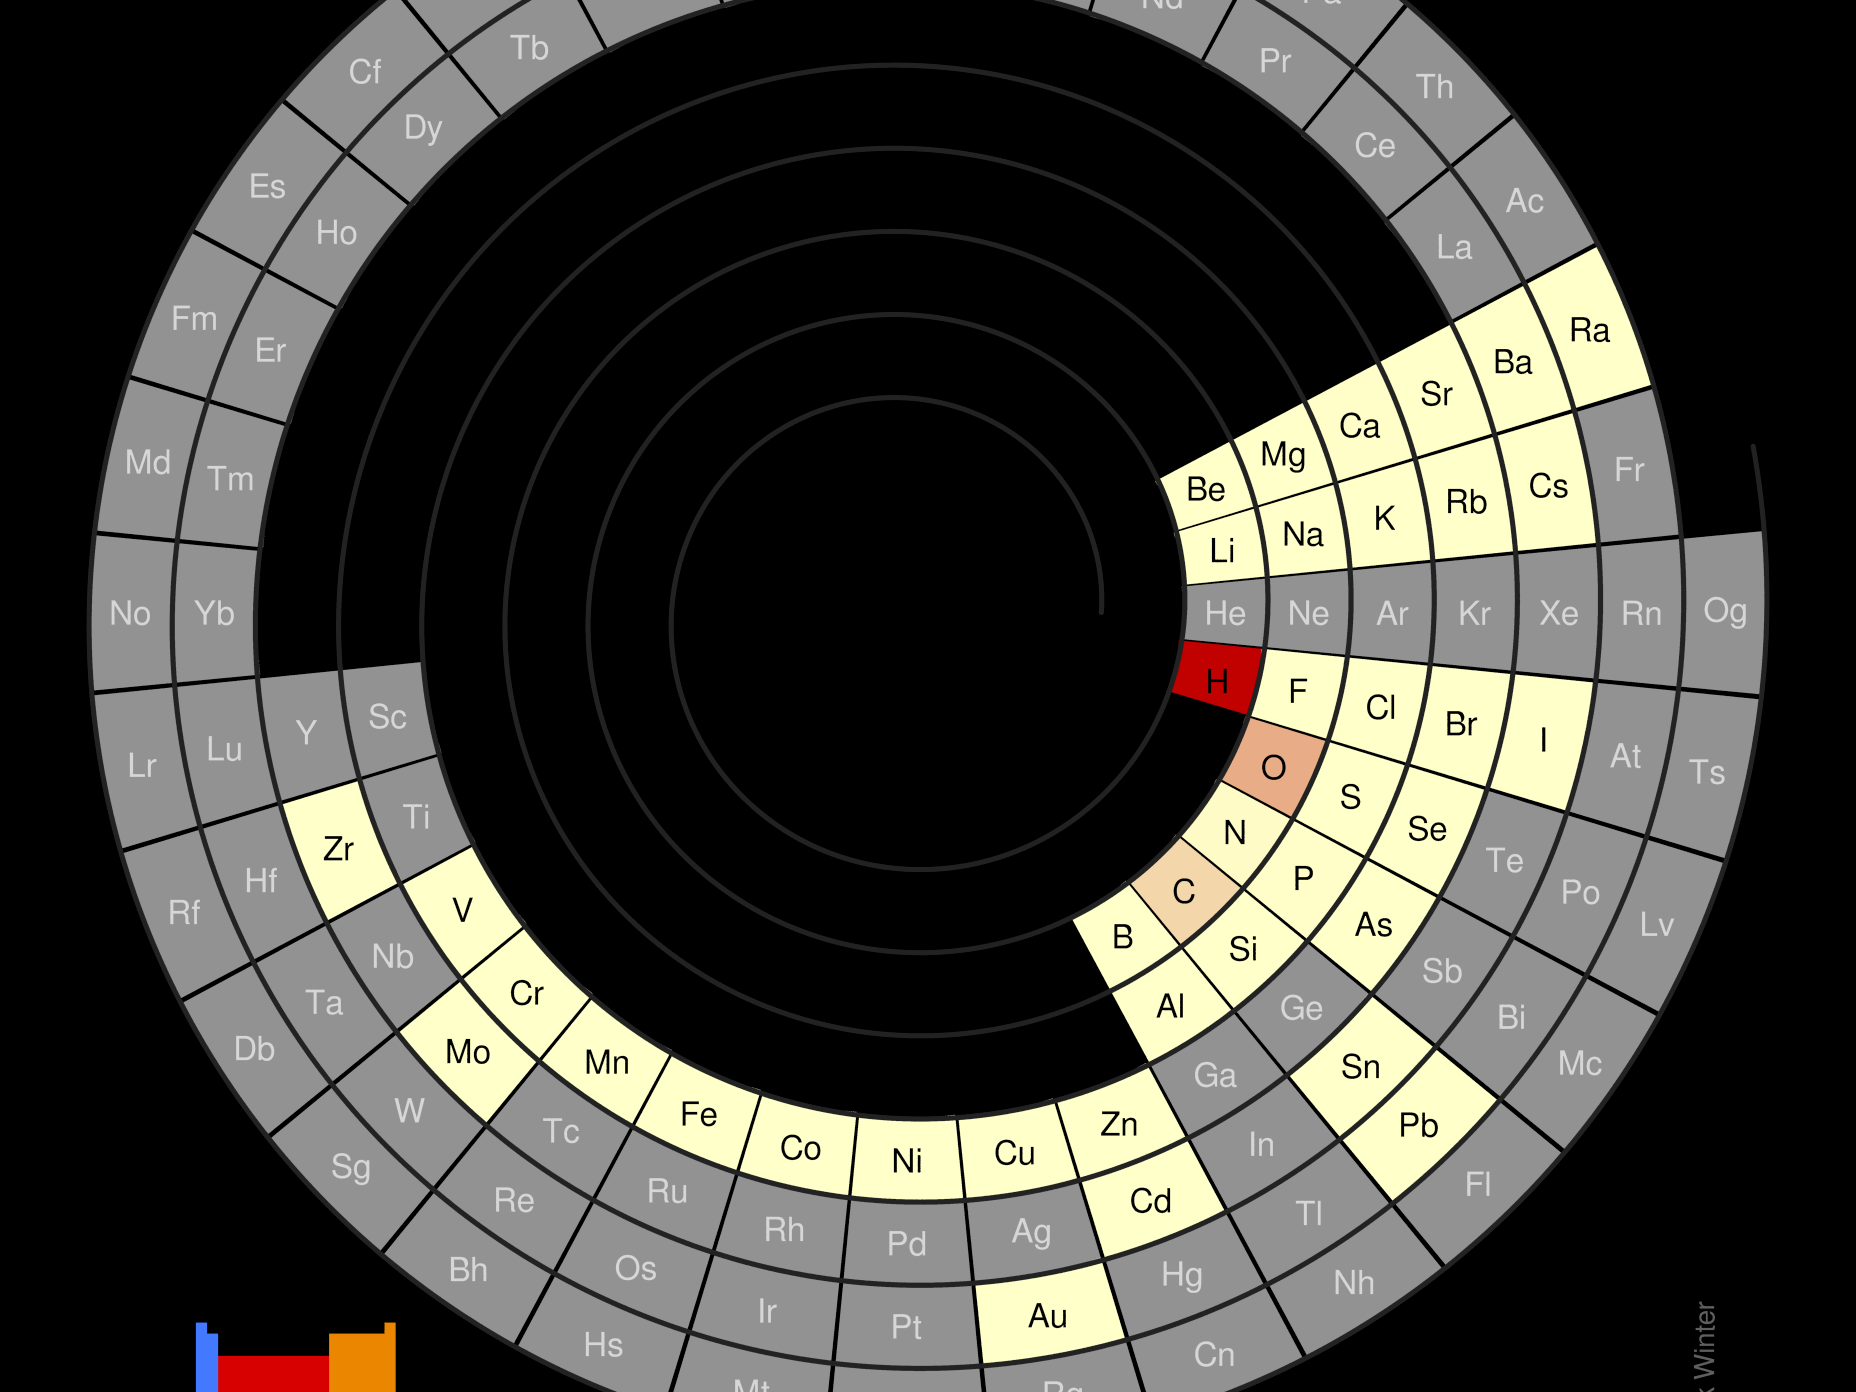 Image showing periodicity of the chemical elements for abundances in humans (by atoms) in a spiral periodic table heatscape style.